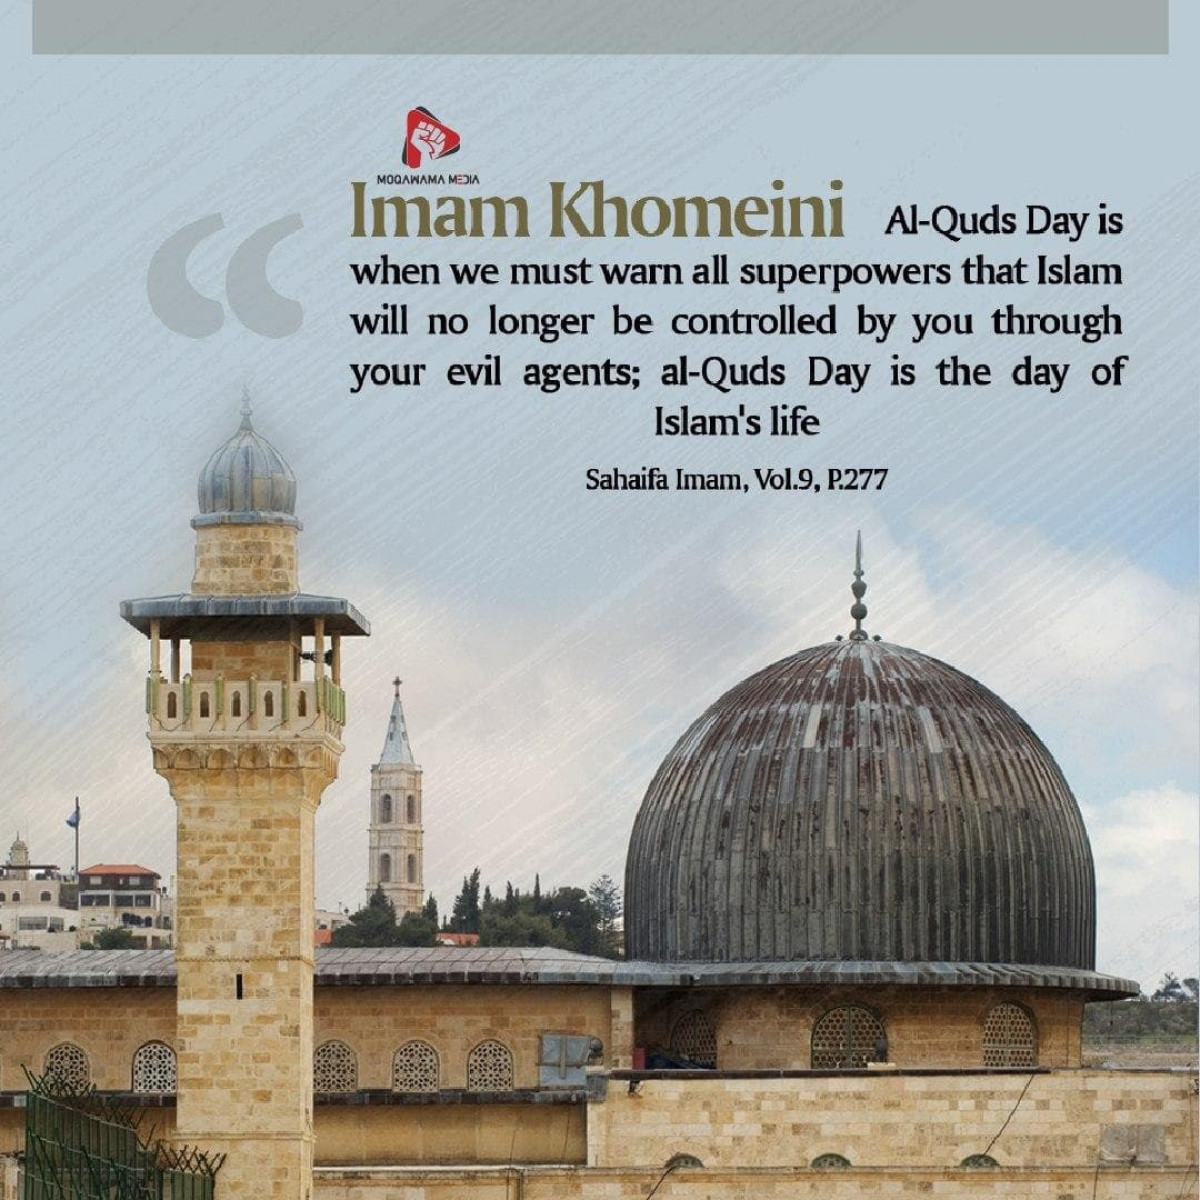 al-Quds Day is the day of Islam's life